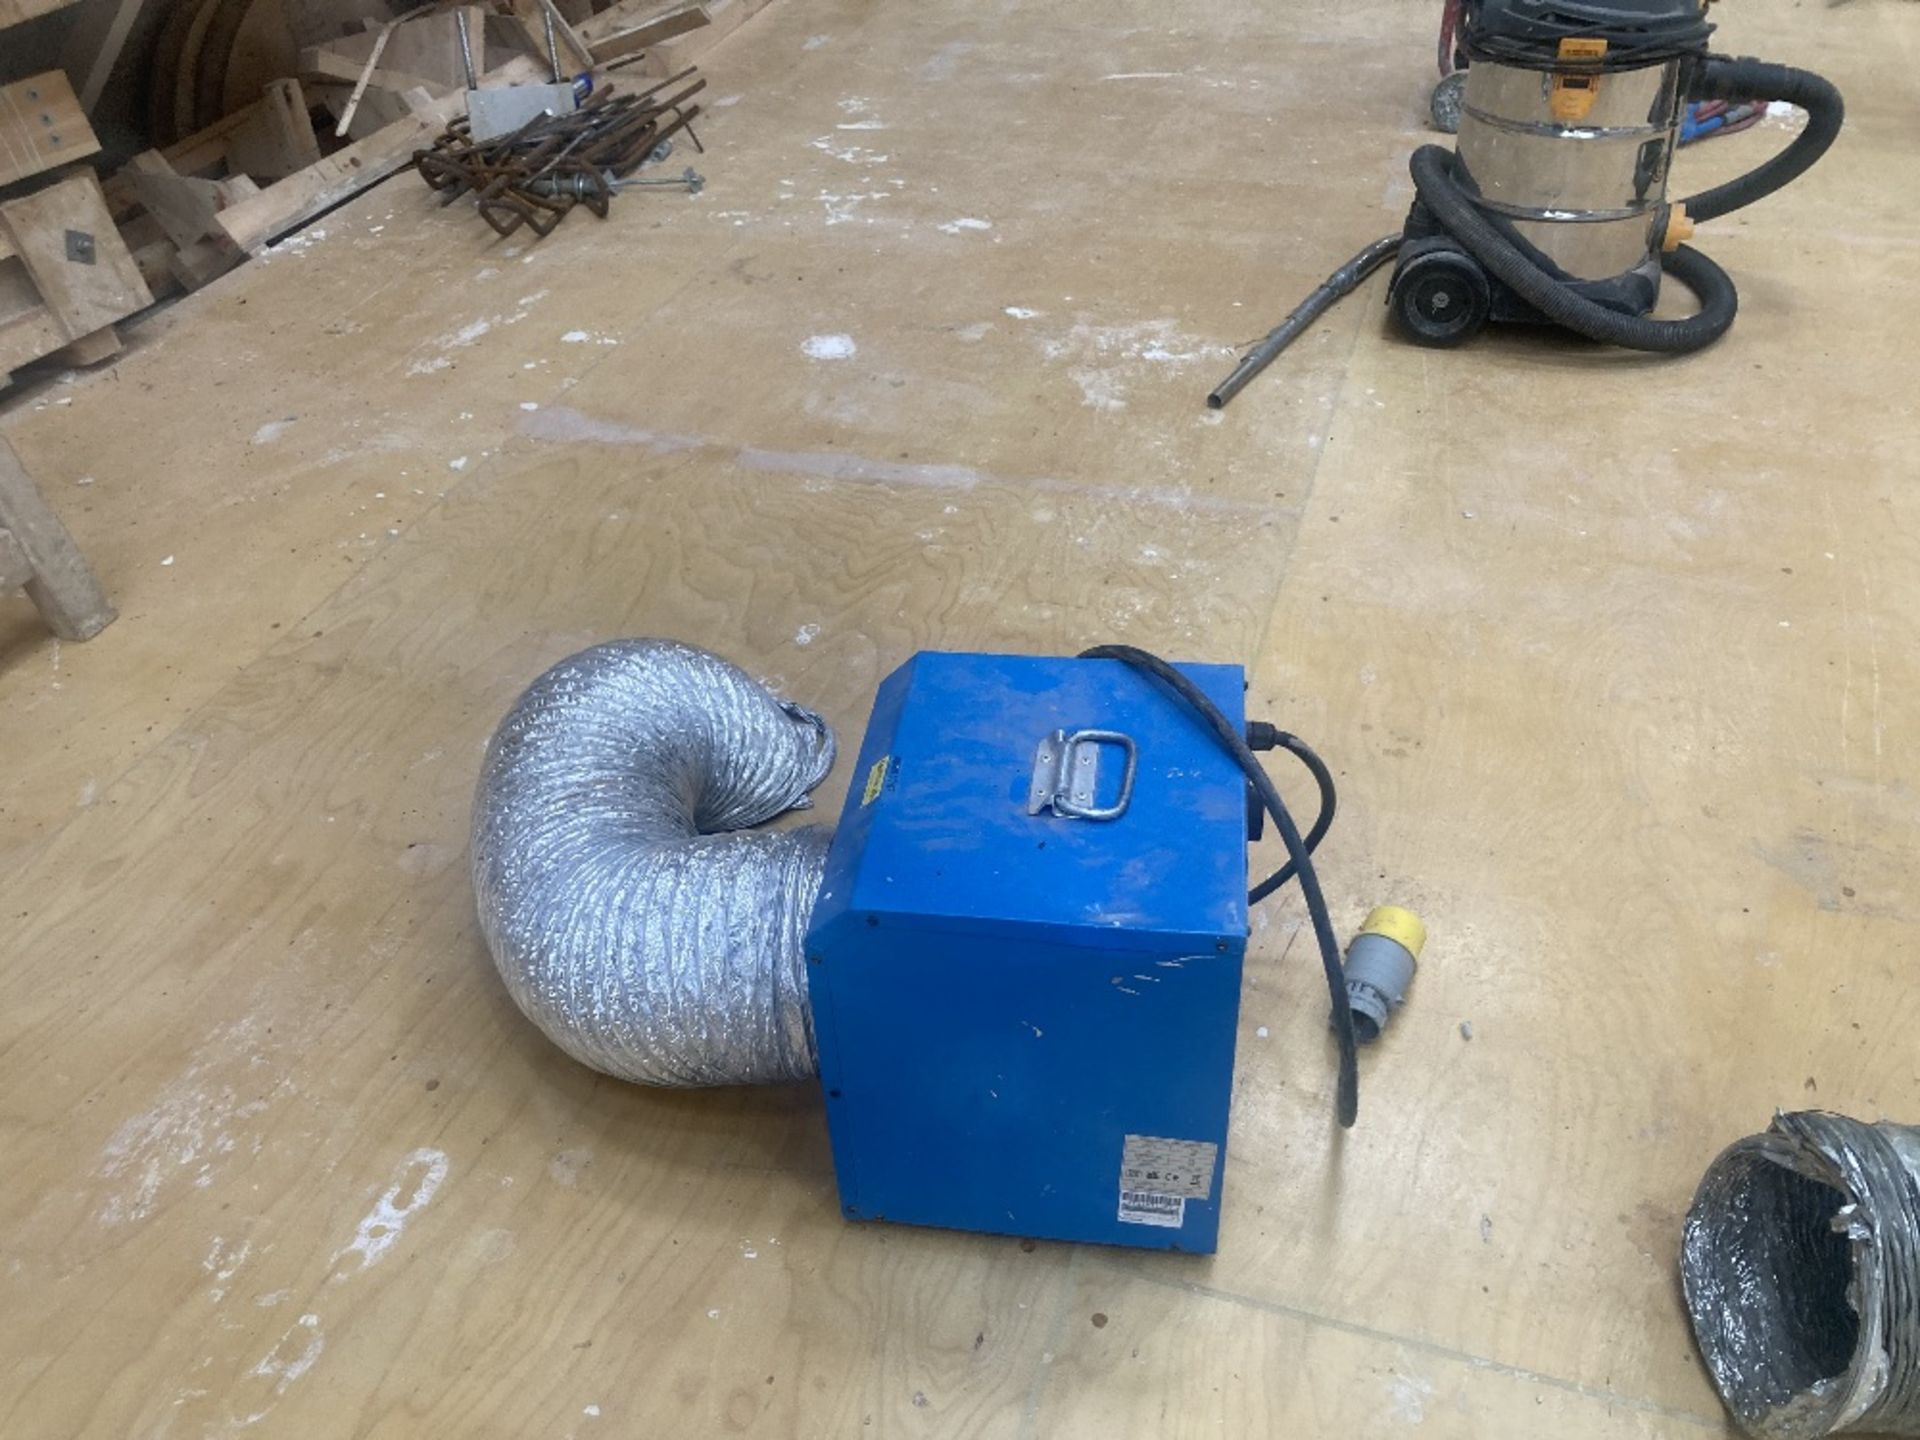 Broughton 110v Industrial Fan Heater With Ducting - Image 4 of 5